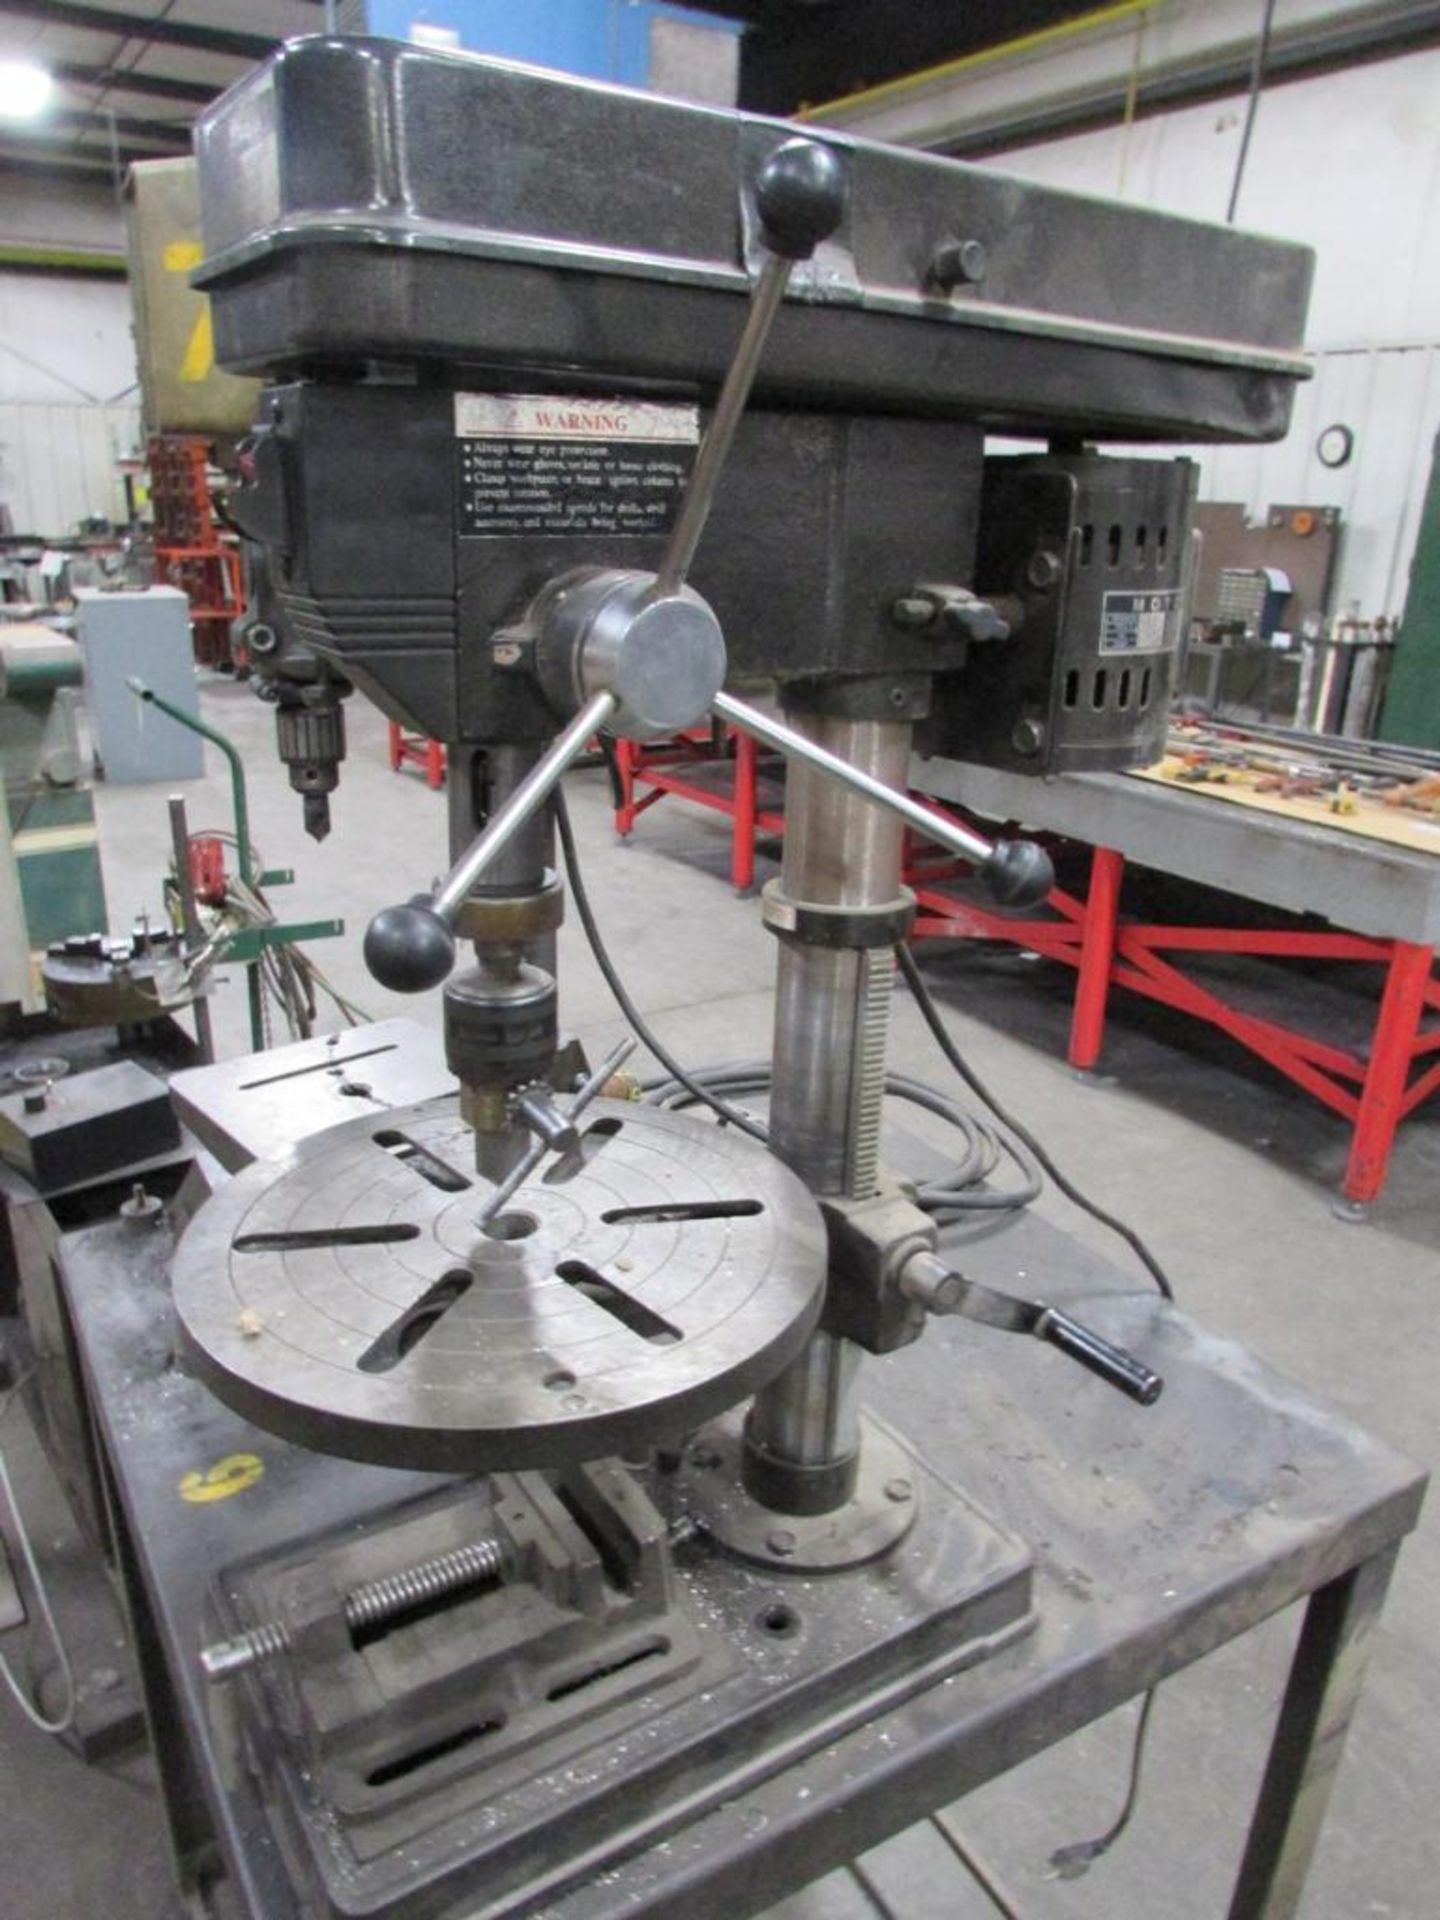 Speedway Series 3514 12" Benchtop Drill Press, 11.5" Diameter Table, 4" Vise, 5/8" Chuck, 2-1/4" Str - Image 3 of 7